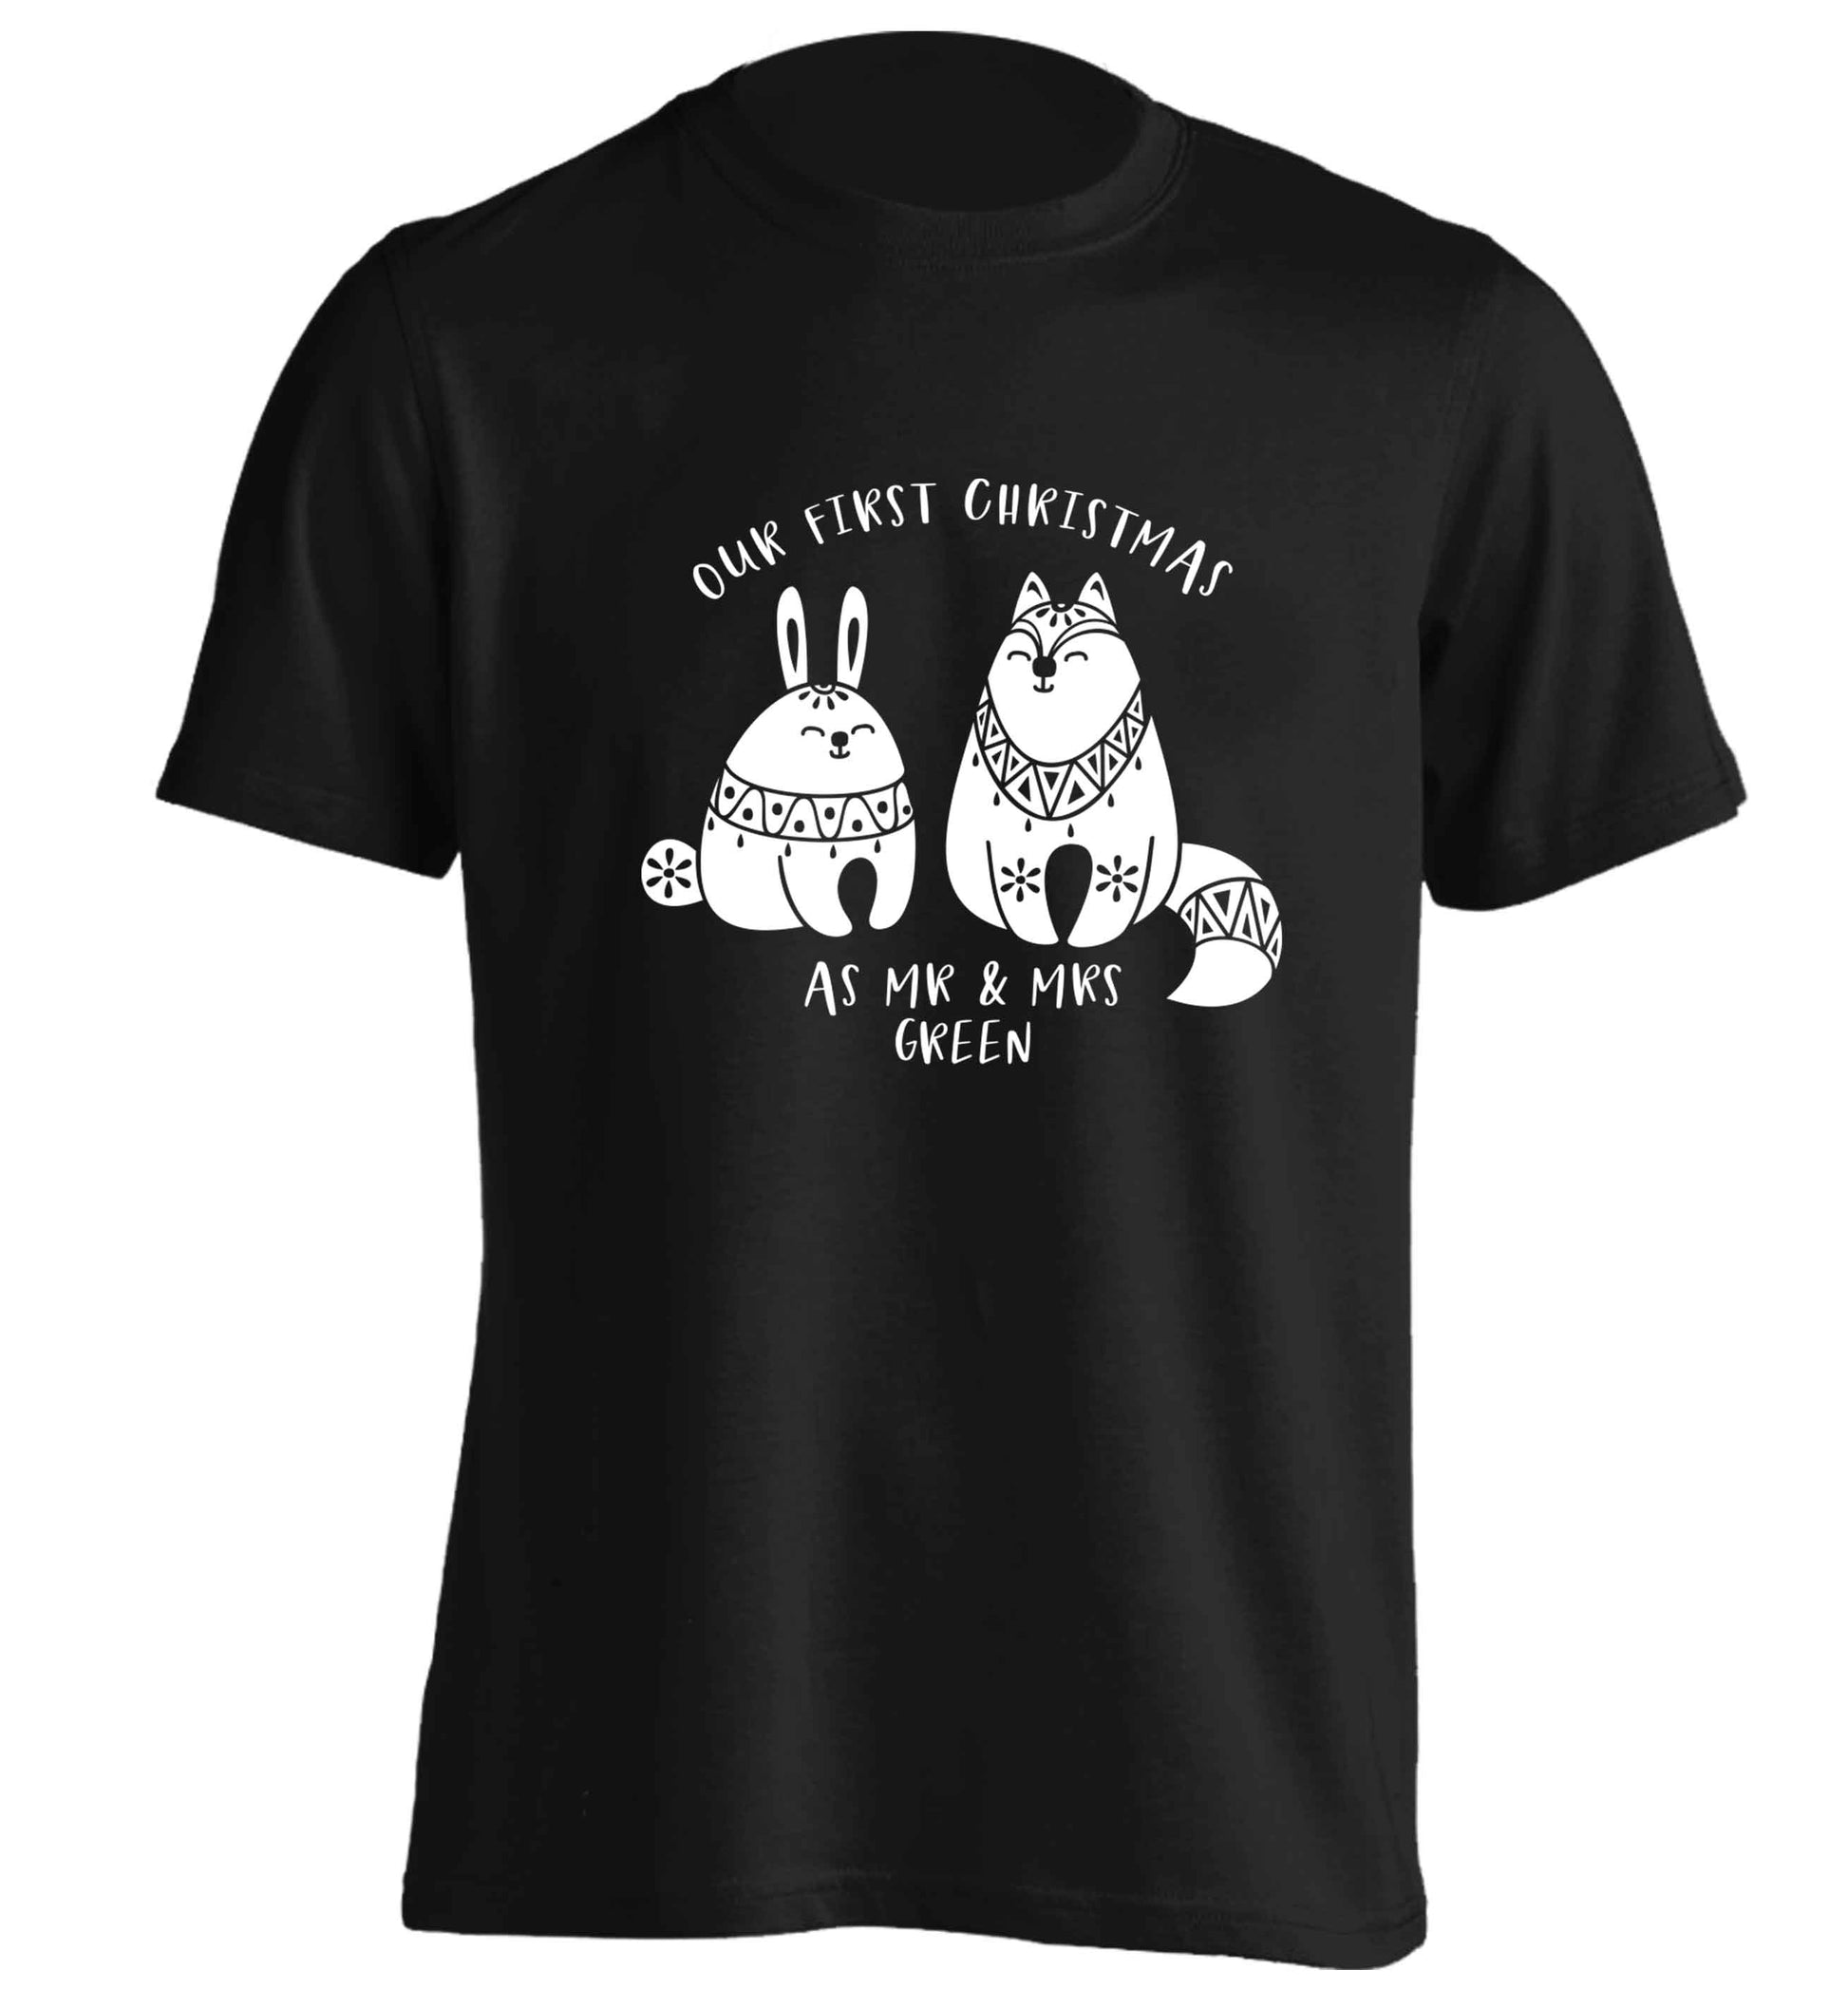 Our first Christmas as Mr & Mrs personalised adults unisex black Tshirt 2XL